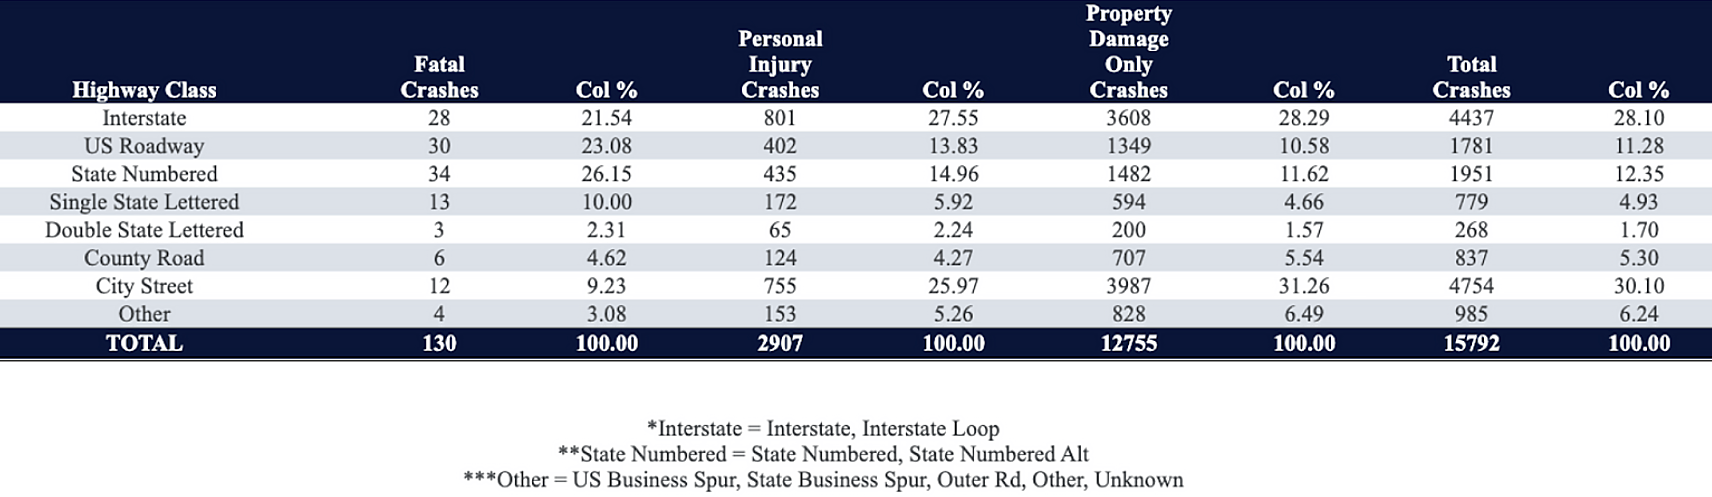 missouri-truck-accident-statistics-by-highway-classification-and-crash-severity